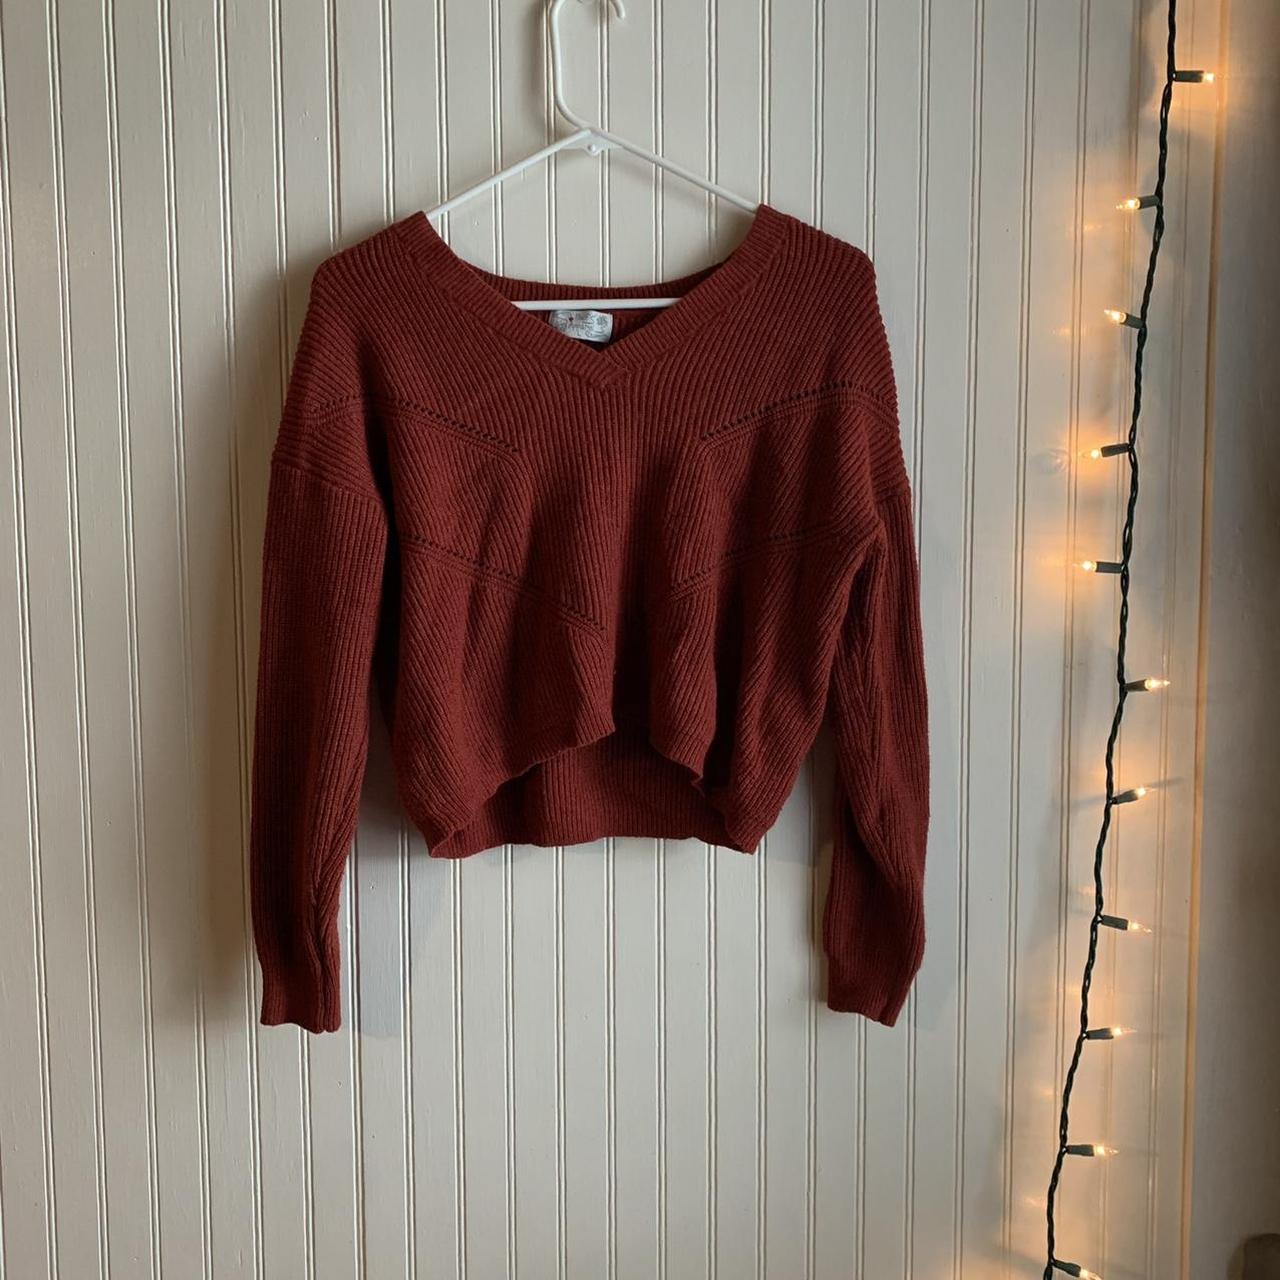 Product Image 1 - Cute red cropped sweater. Gently